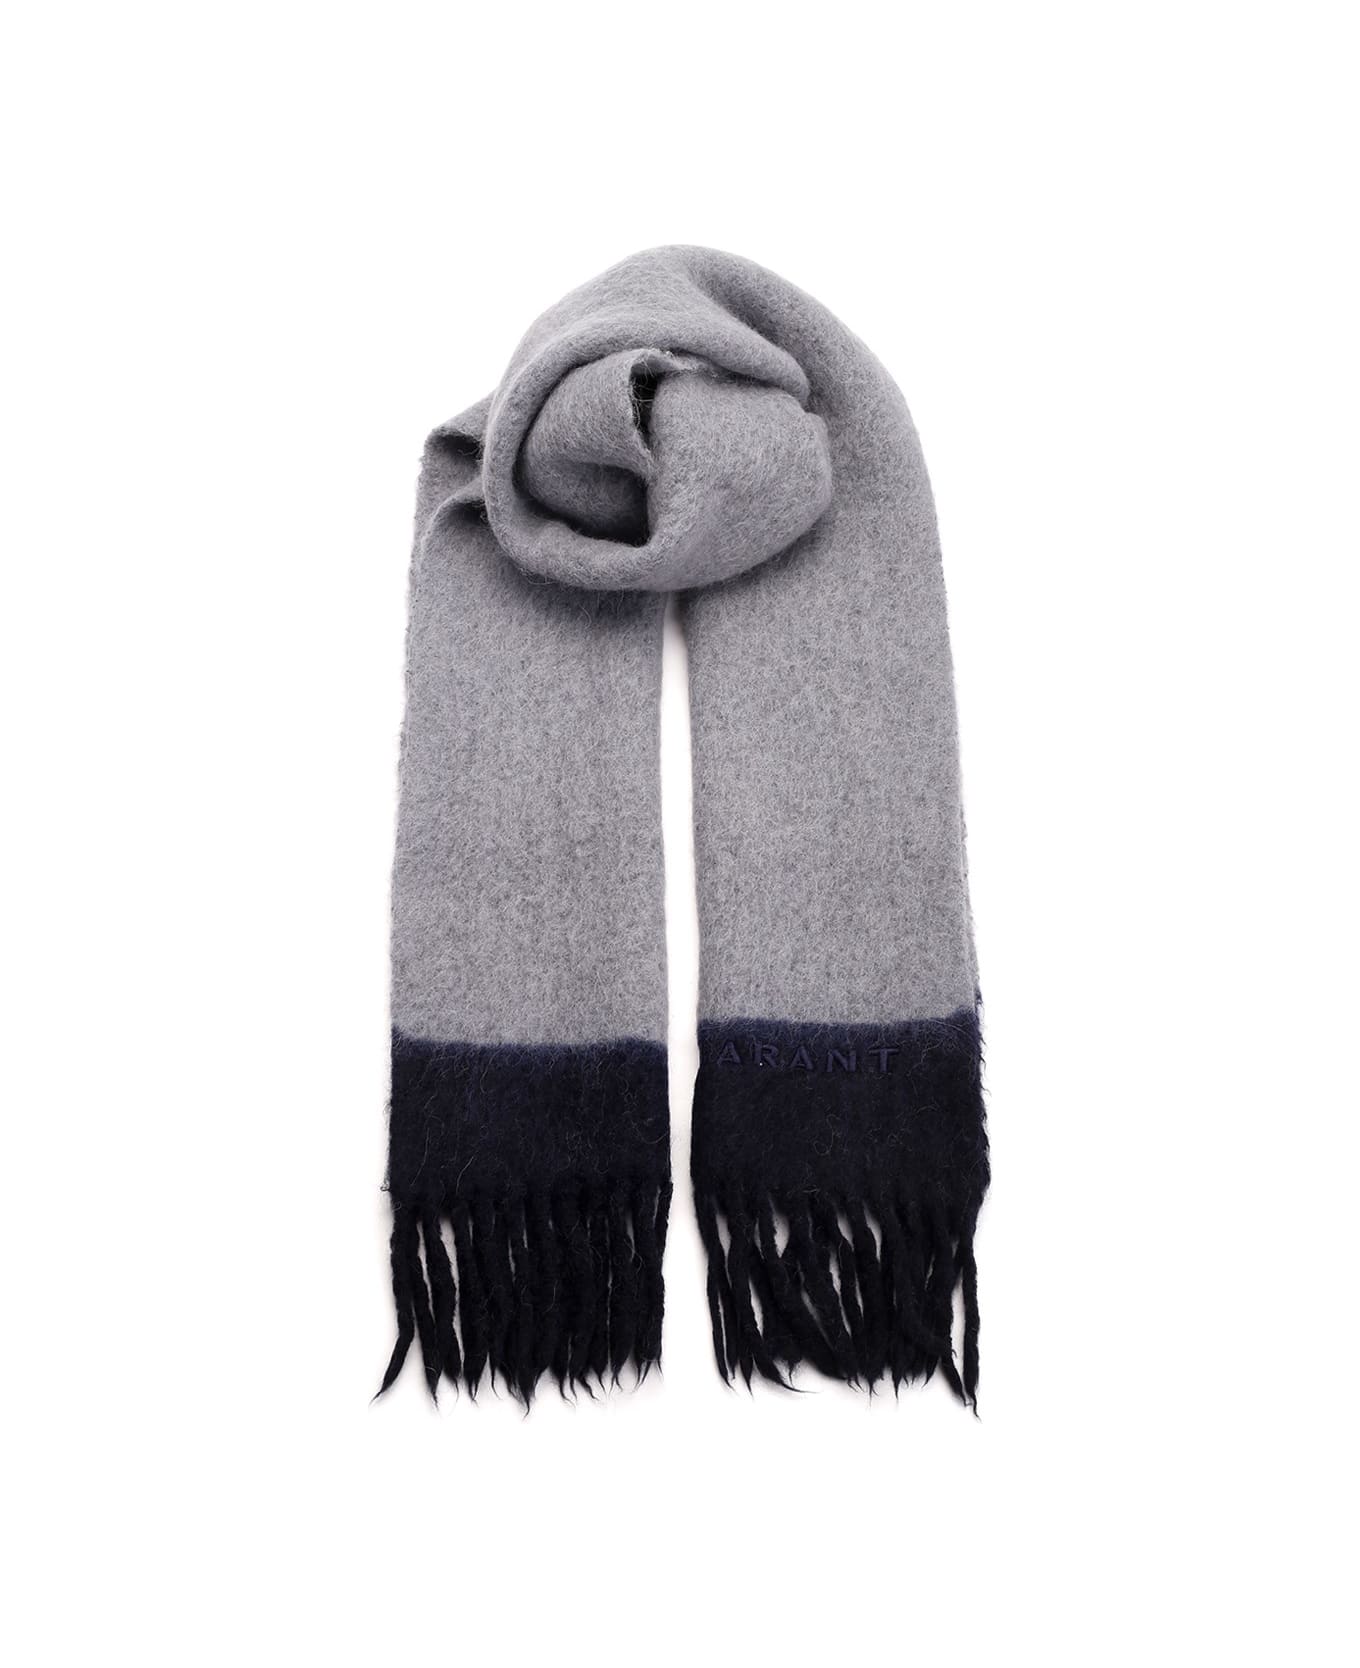 Isabel Marant 'firny' Scarf - Multicolor